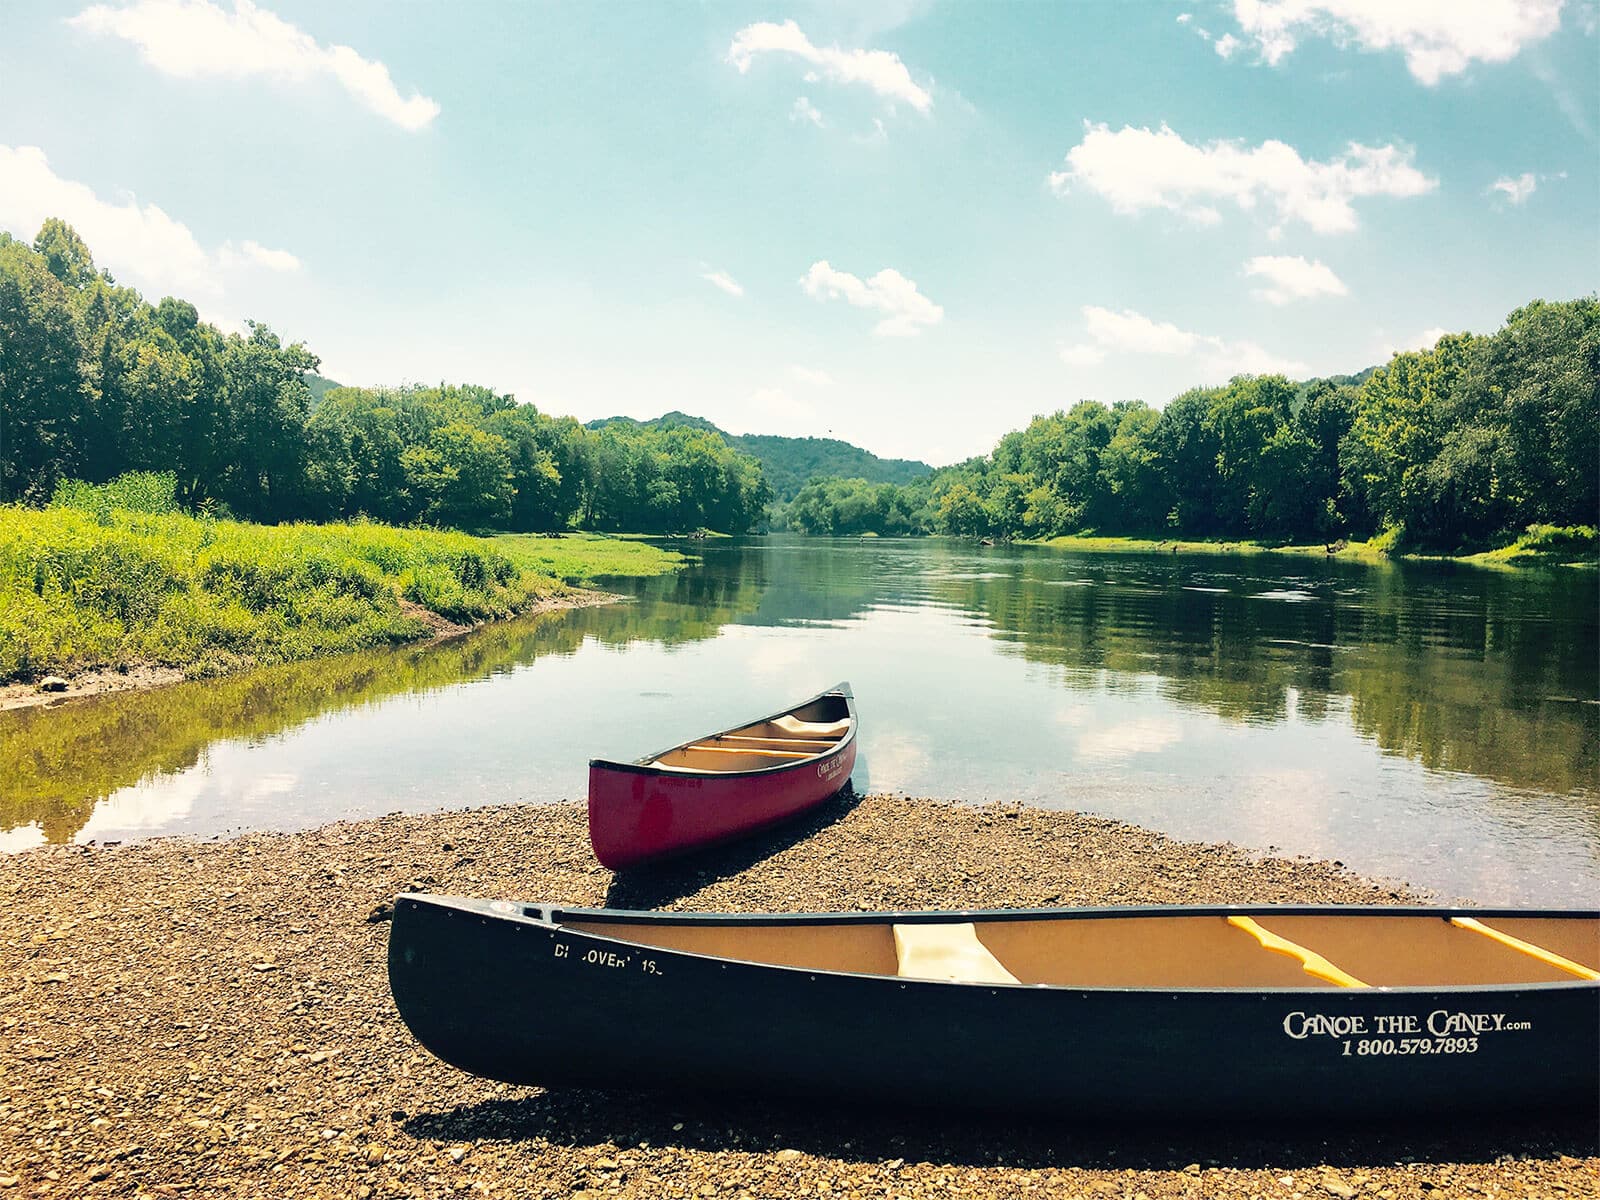 Watertight Box - Canoe The Caney™ Canoe and Kayak Rentals on the Caney Fork  River